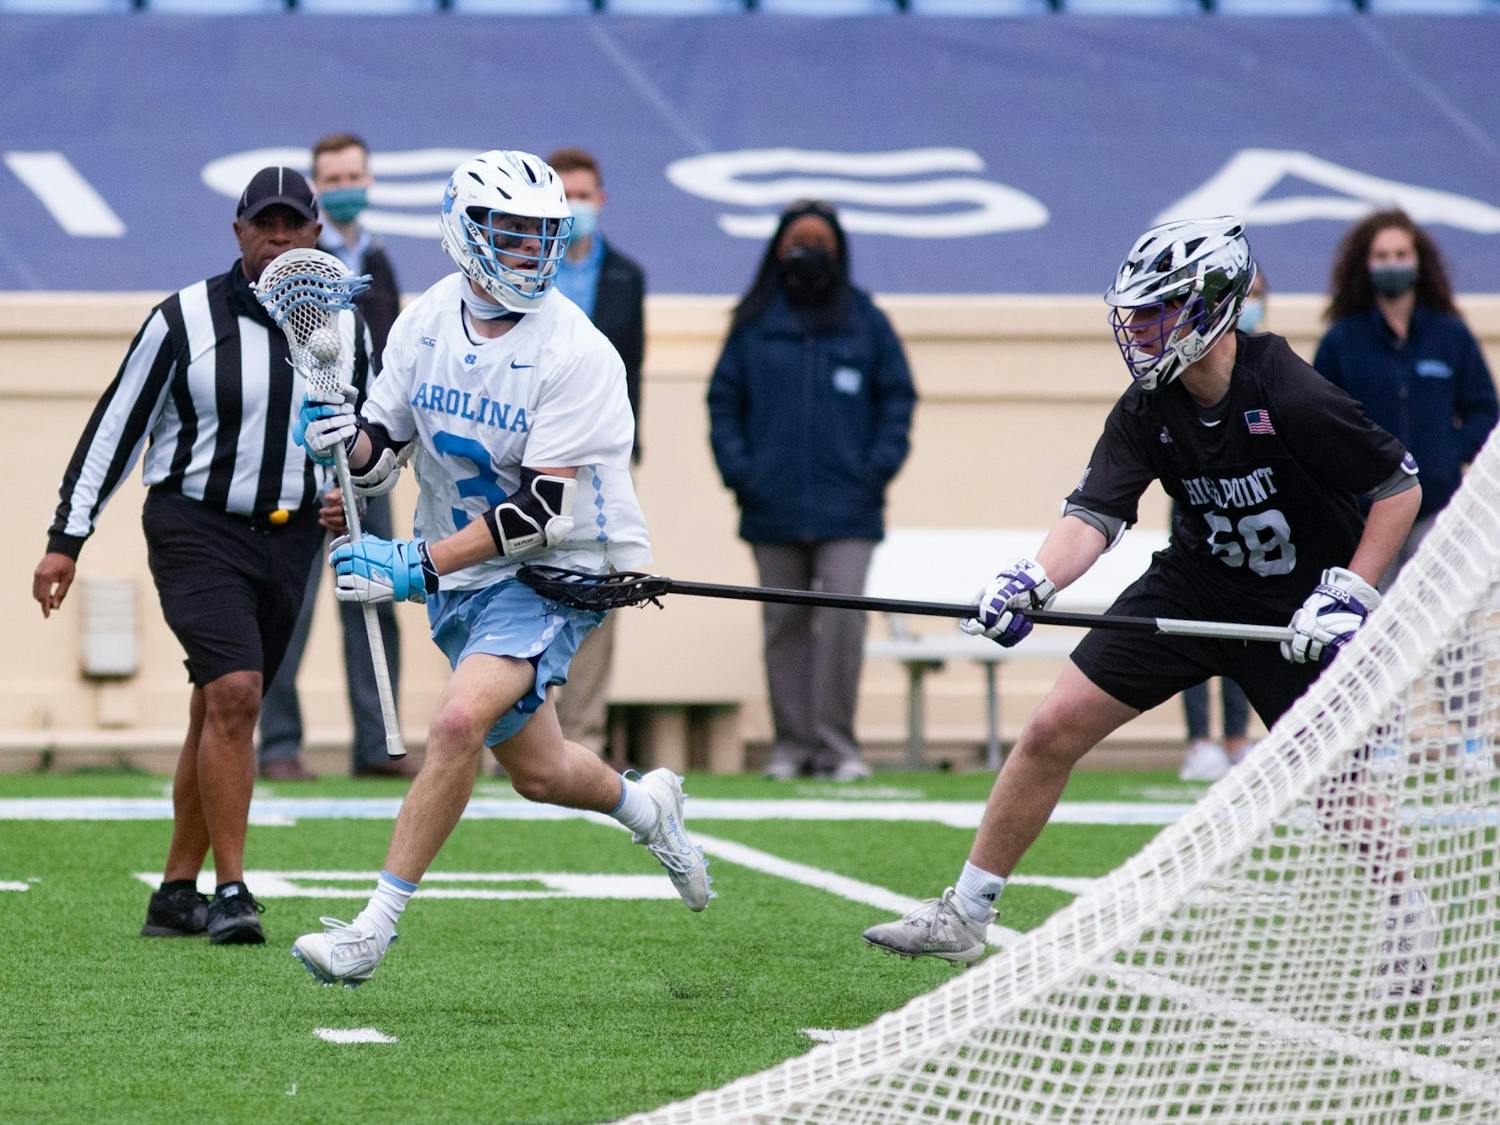 Senior midfielder William Perry (3) looks for an opening. UNC wins against High Point 27-12 at Kenan Stadium on Saturday, Feb. 27, 2021.